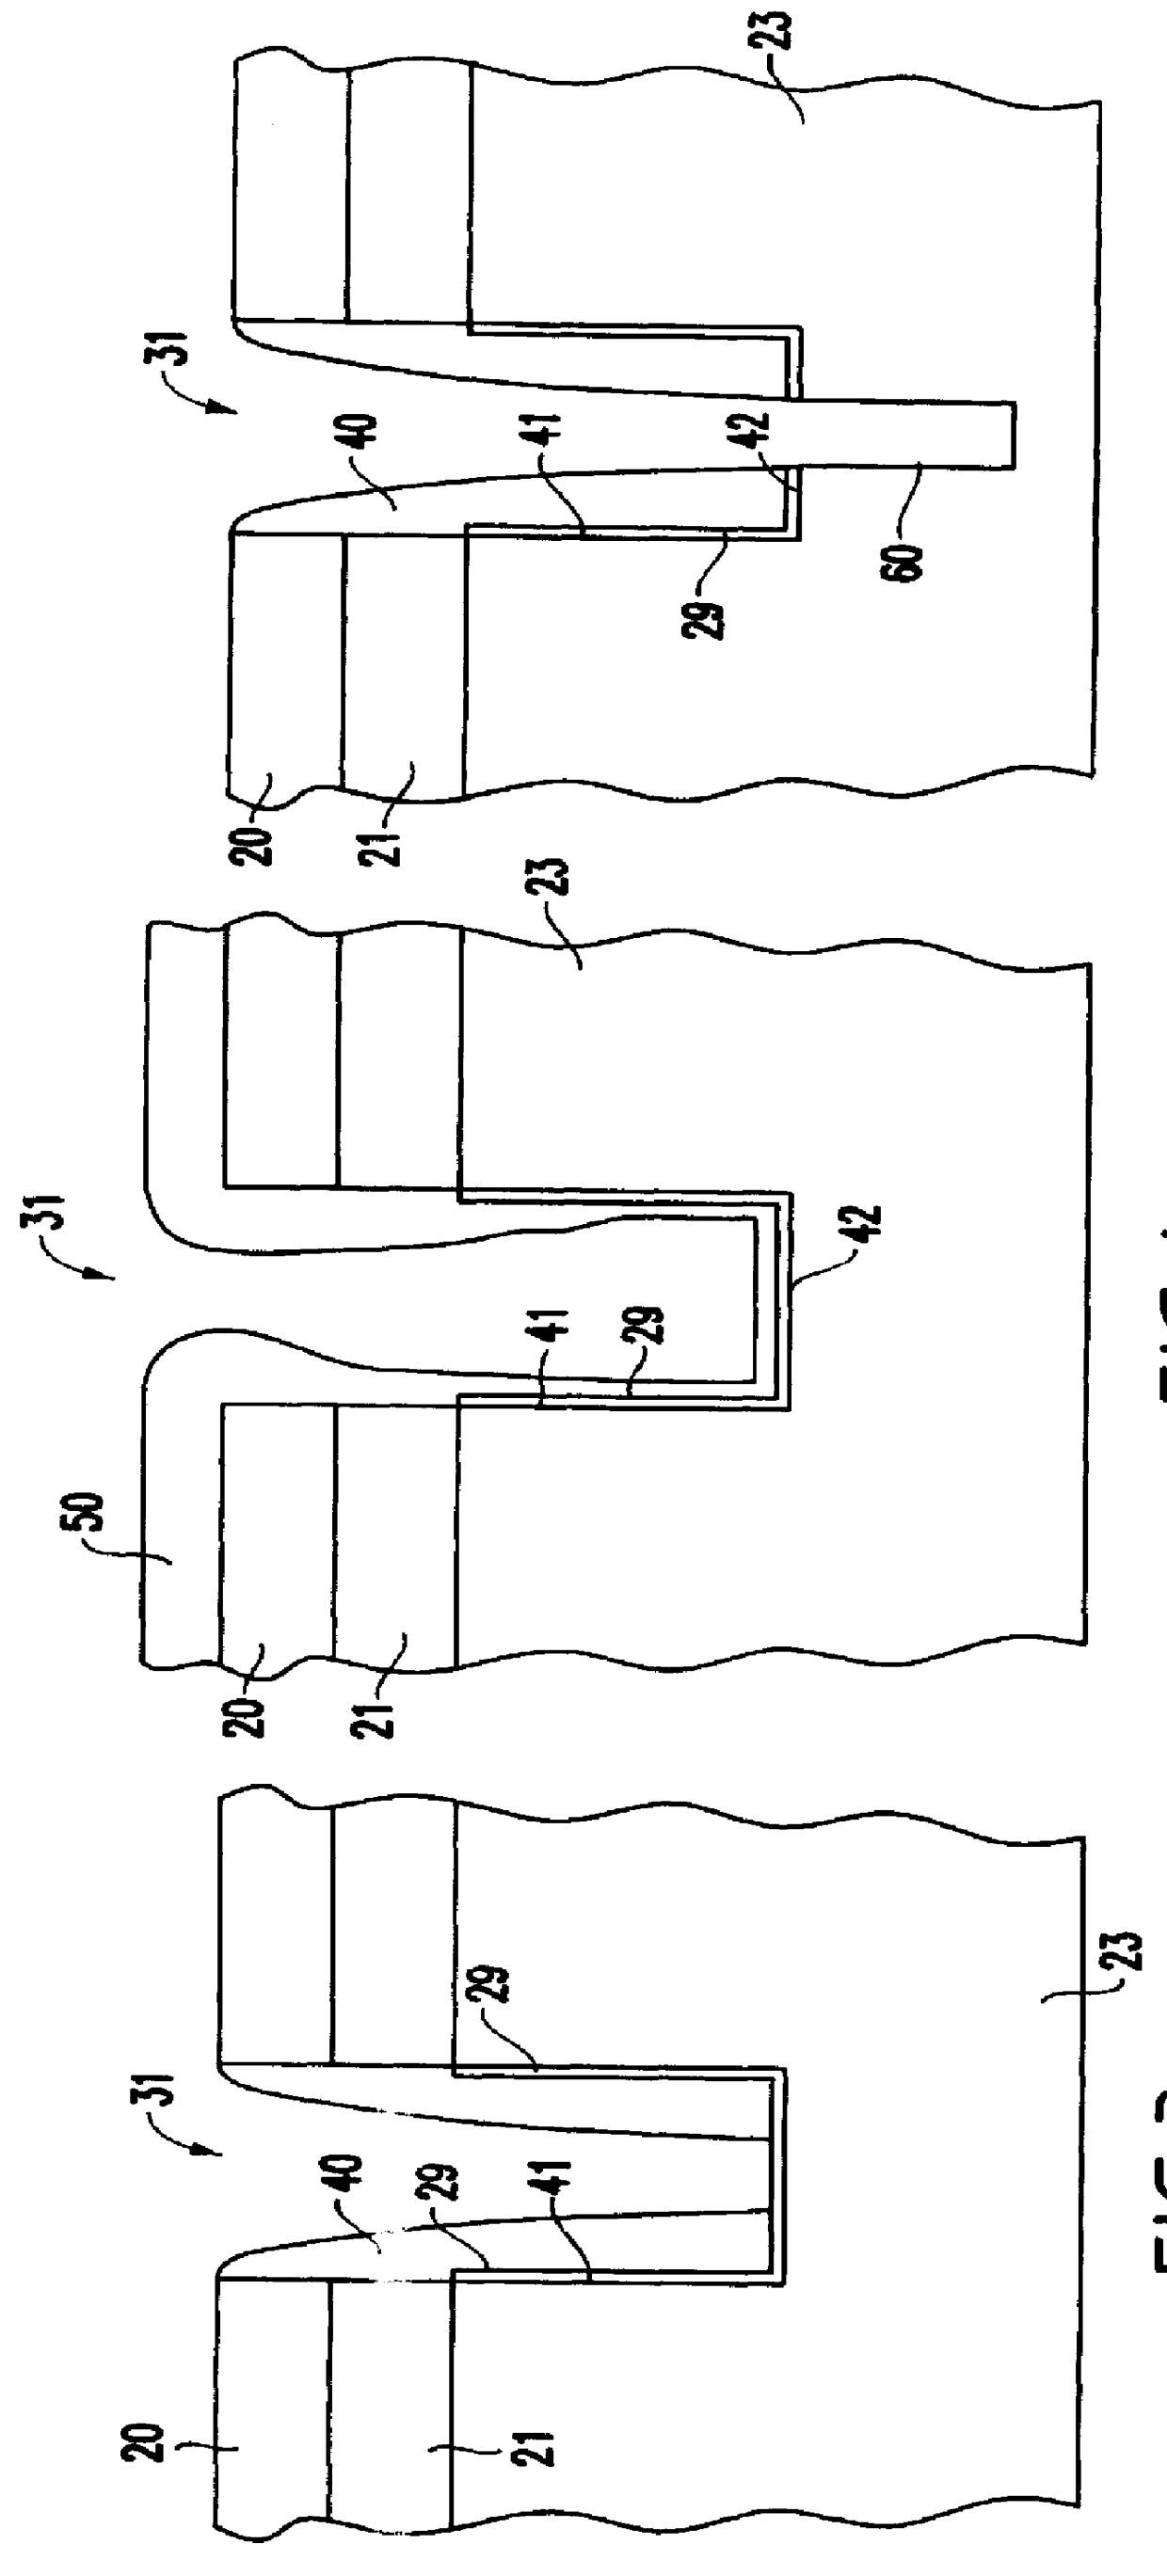 Shallow trench isolation method utilizing combination of spacer and fill